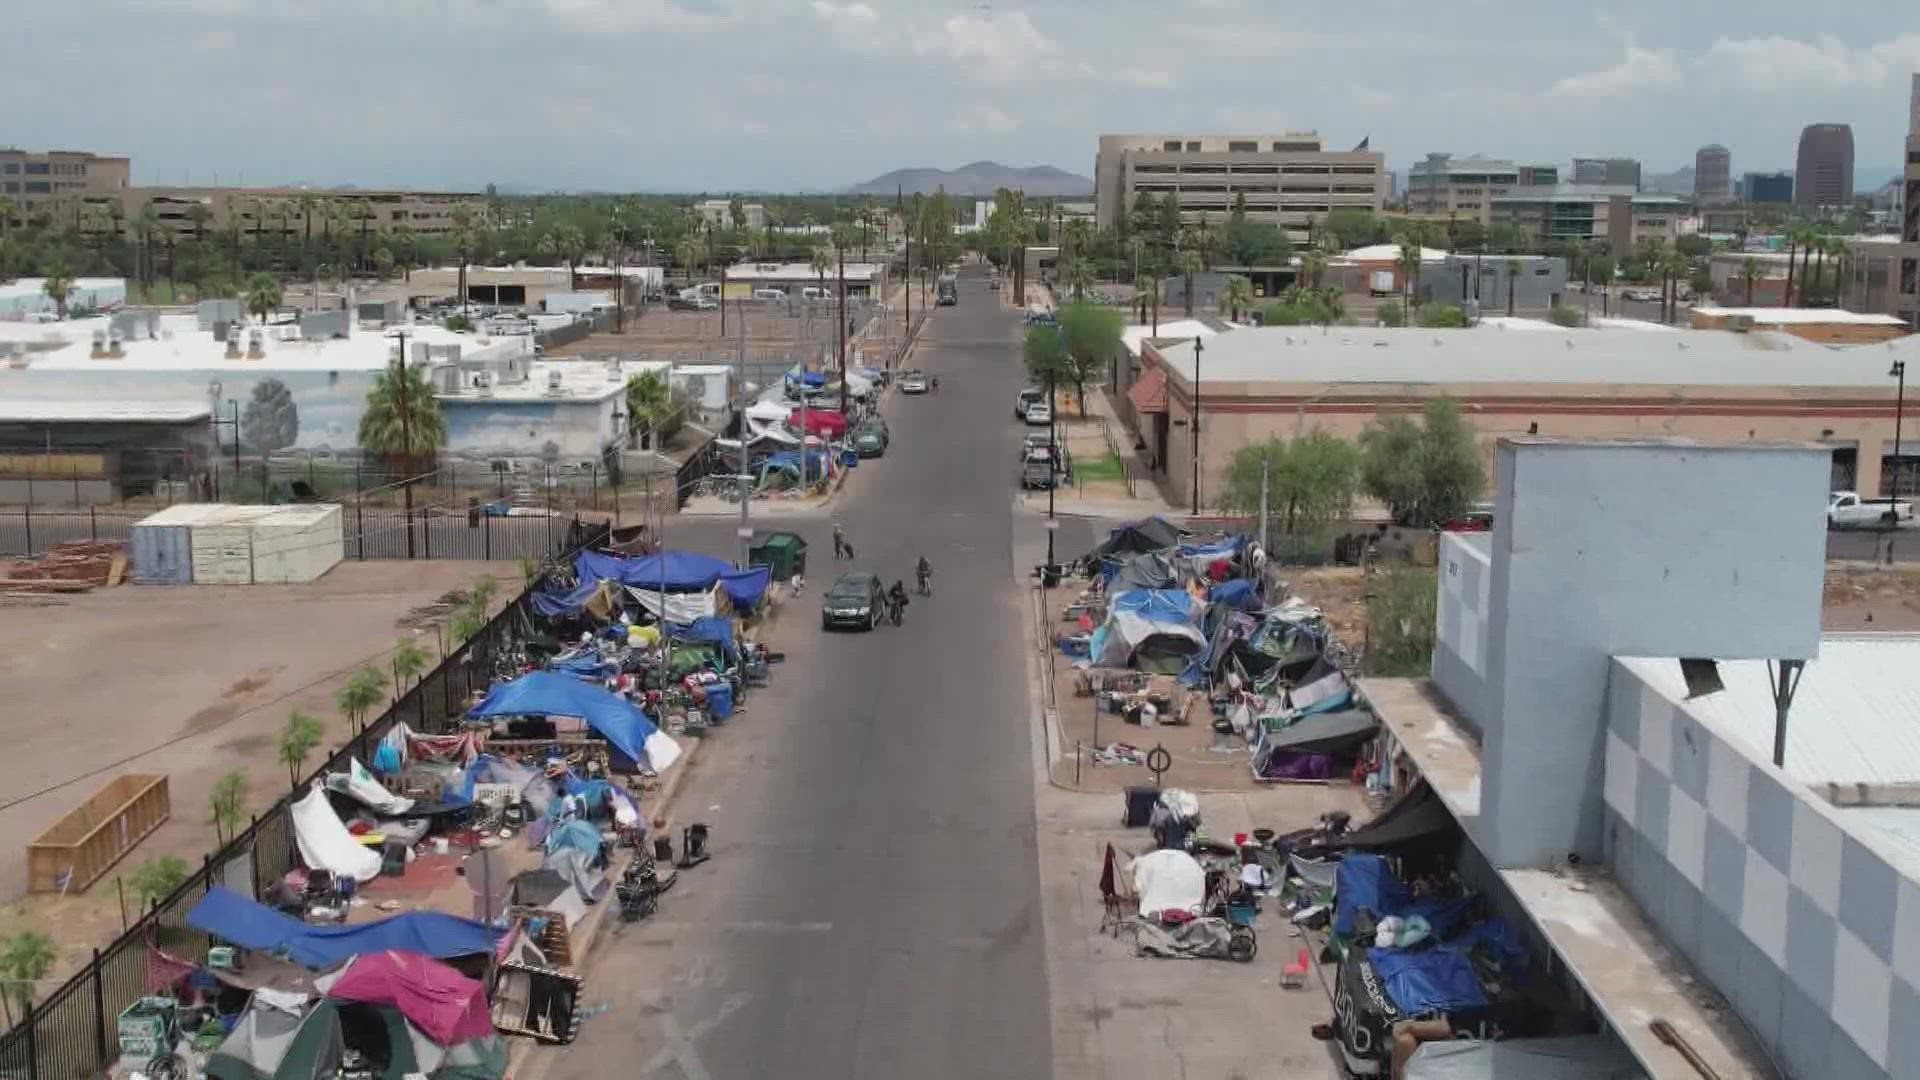 According to data compiled by HUD, the number of people experiencing homelessness in the Phoenix metro area has increased 21 percent since 2020.